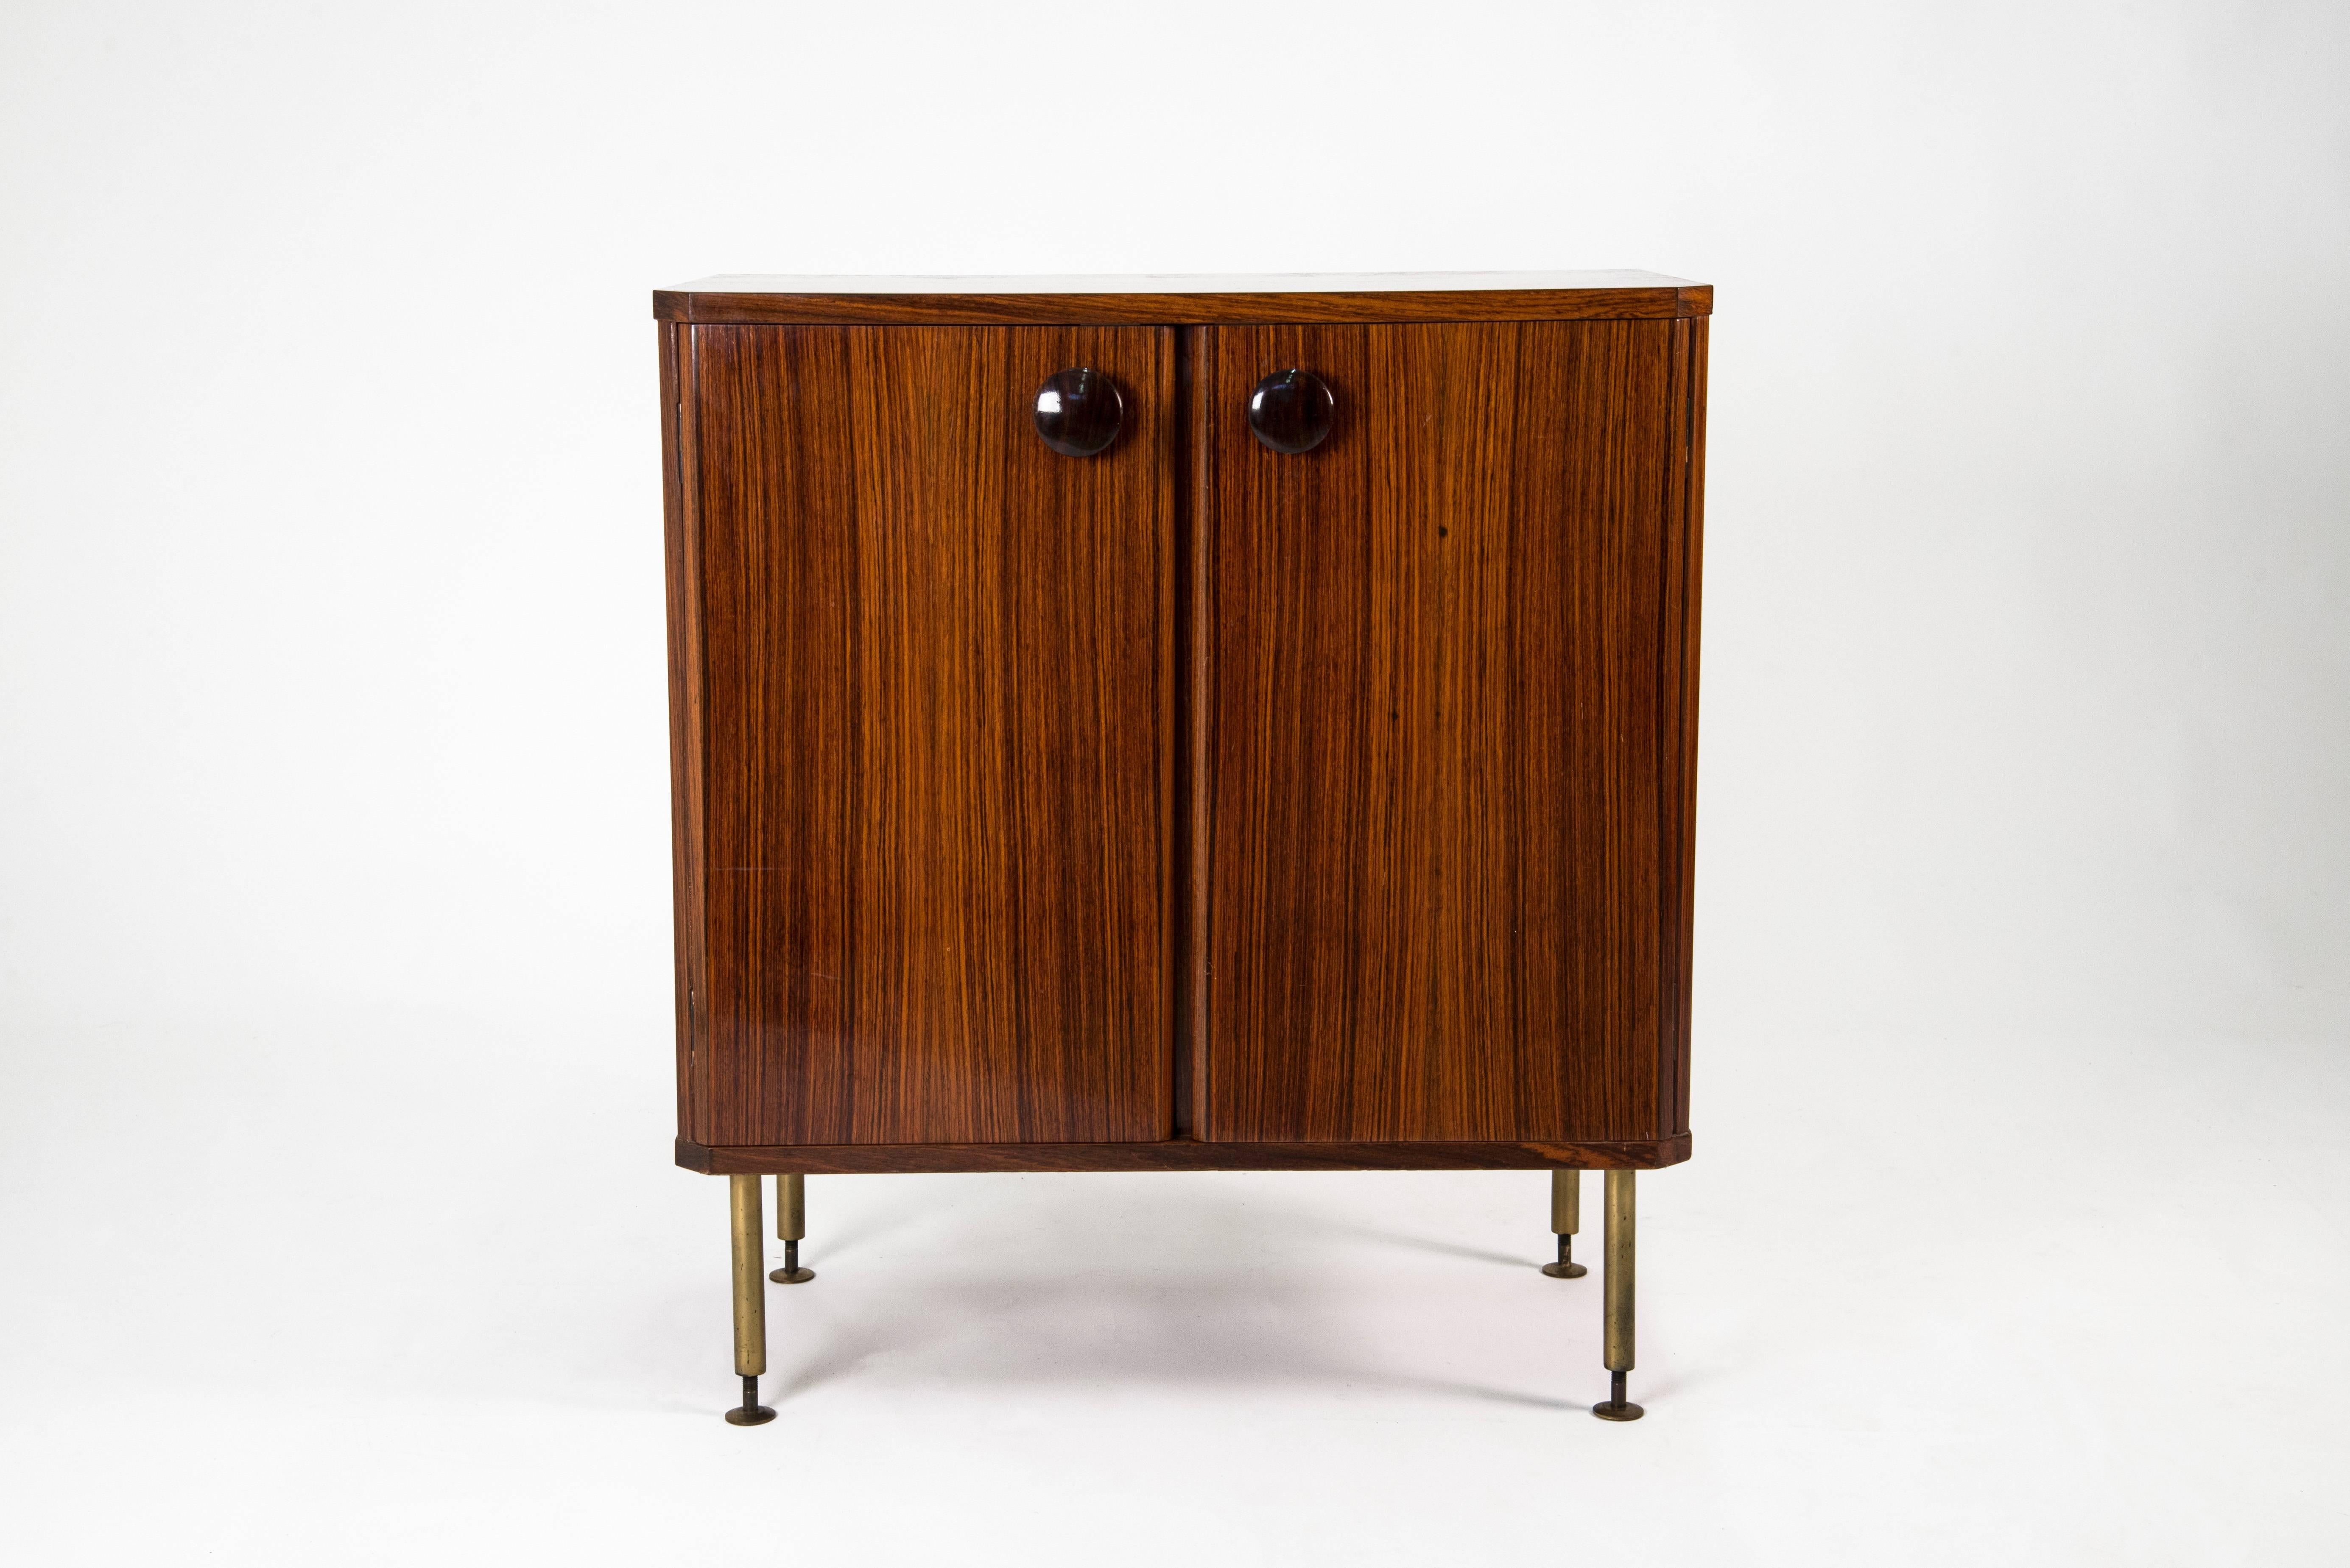 Set of three sideboards designed by Sergio Mazza for a private commission in 1959. Walnut structure with brass adjustable feet and lacquered wooden handles. The internal space is organized as shown in the images. The one with the yellow inside is a